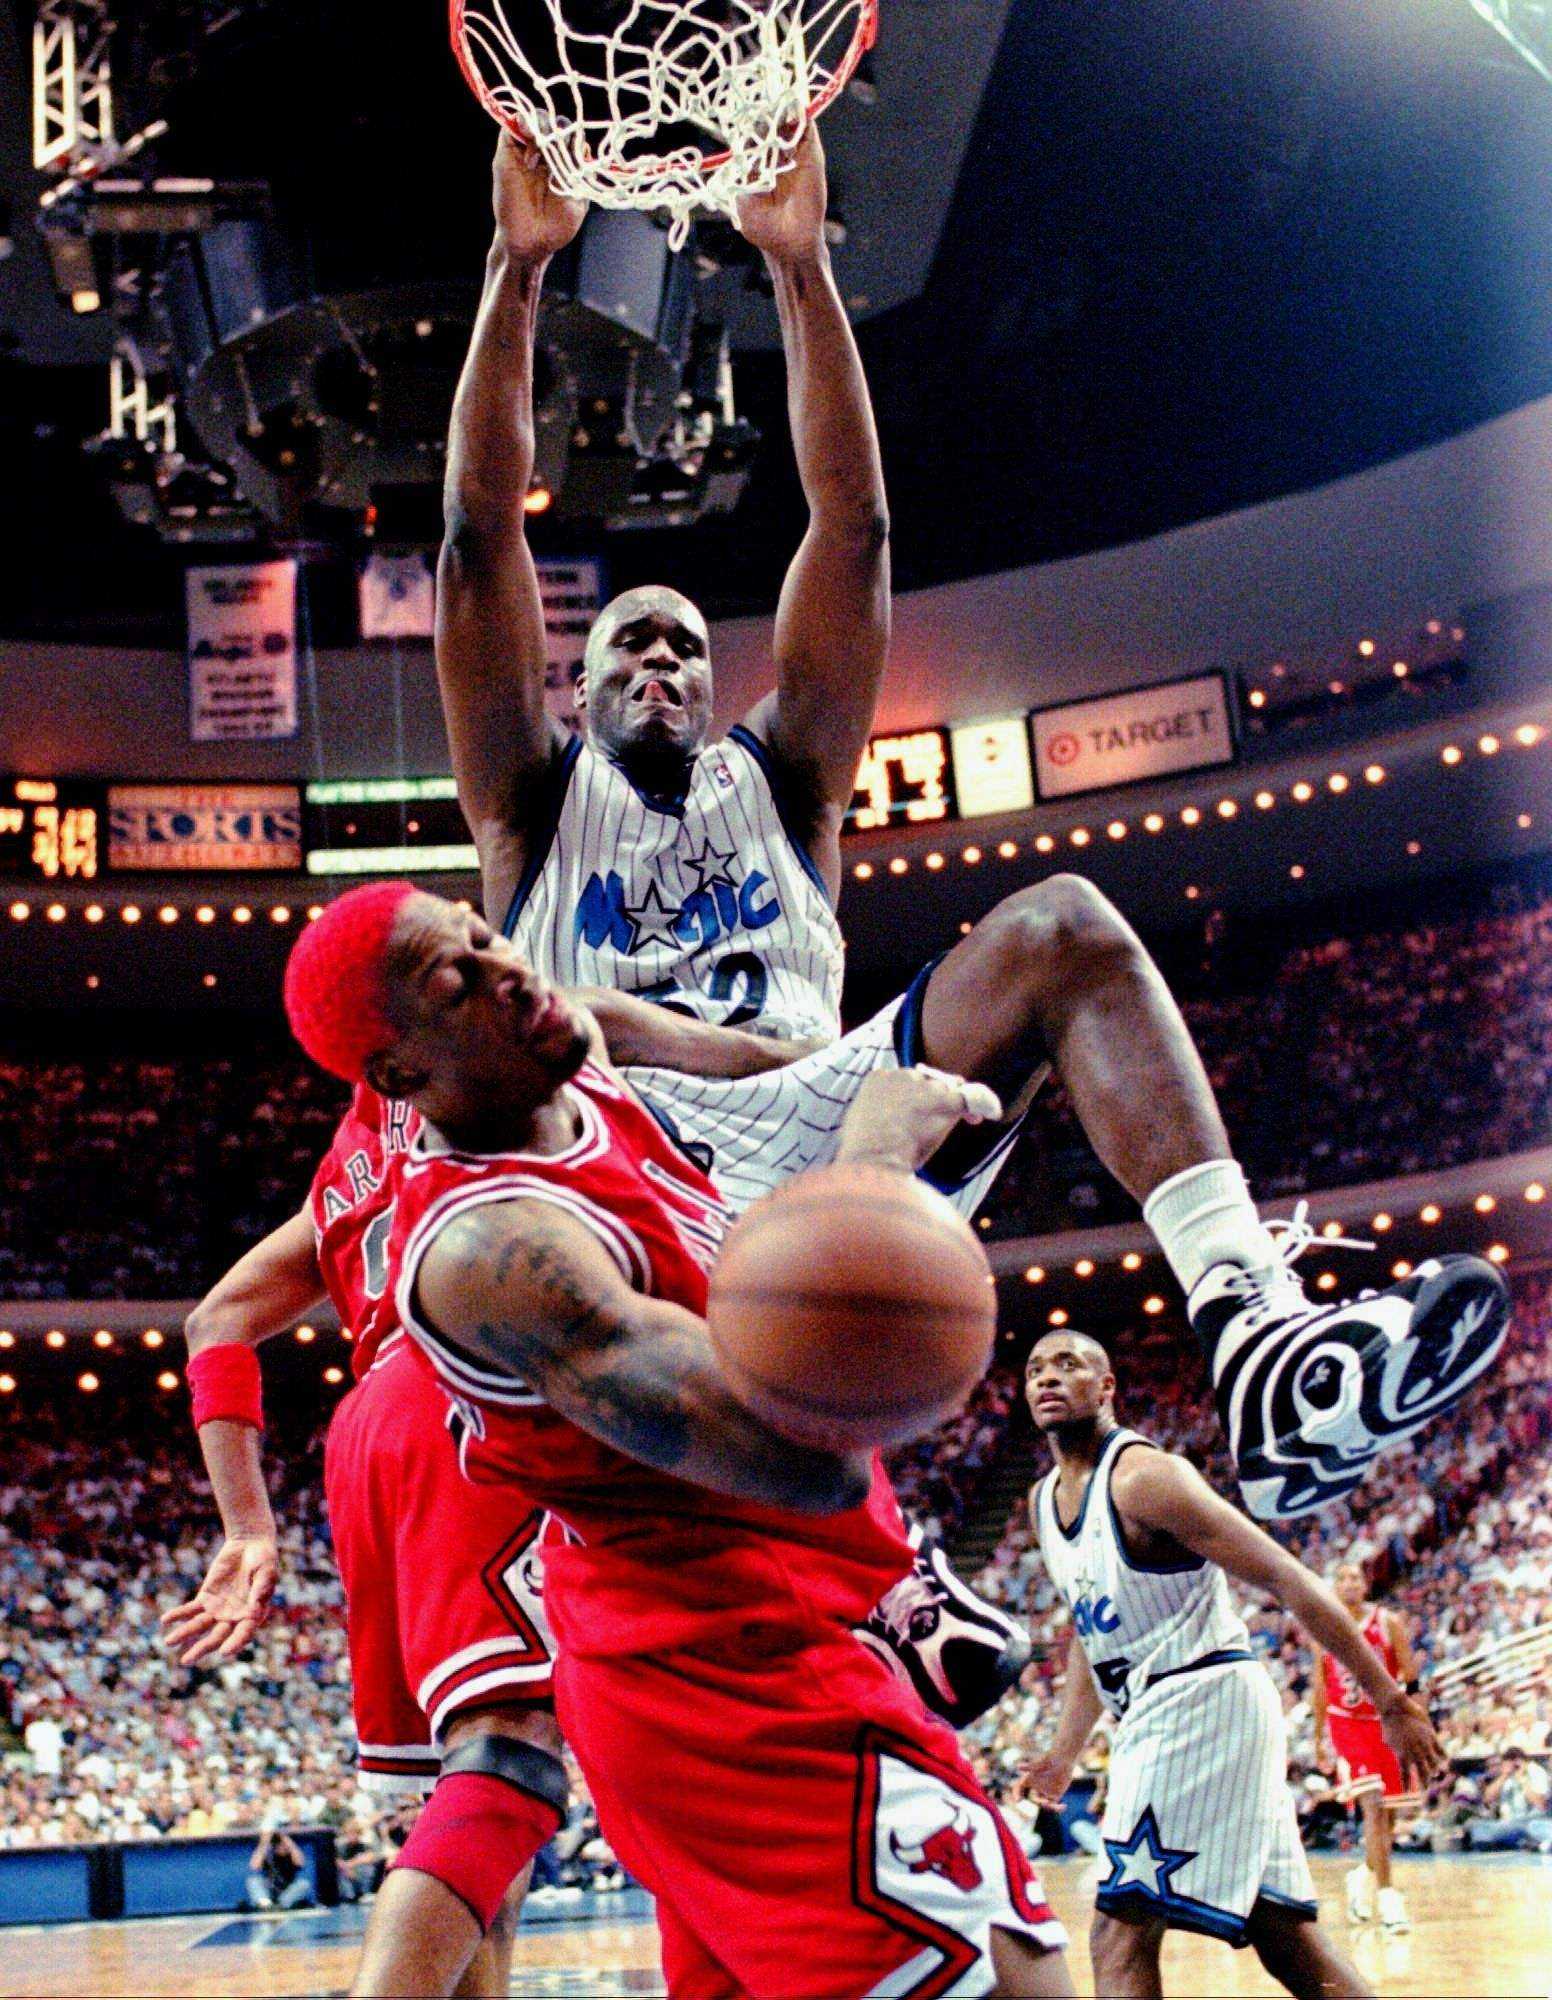 Michael Jordan dunk contest photo explained by SI photographer - Sports Illustrated